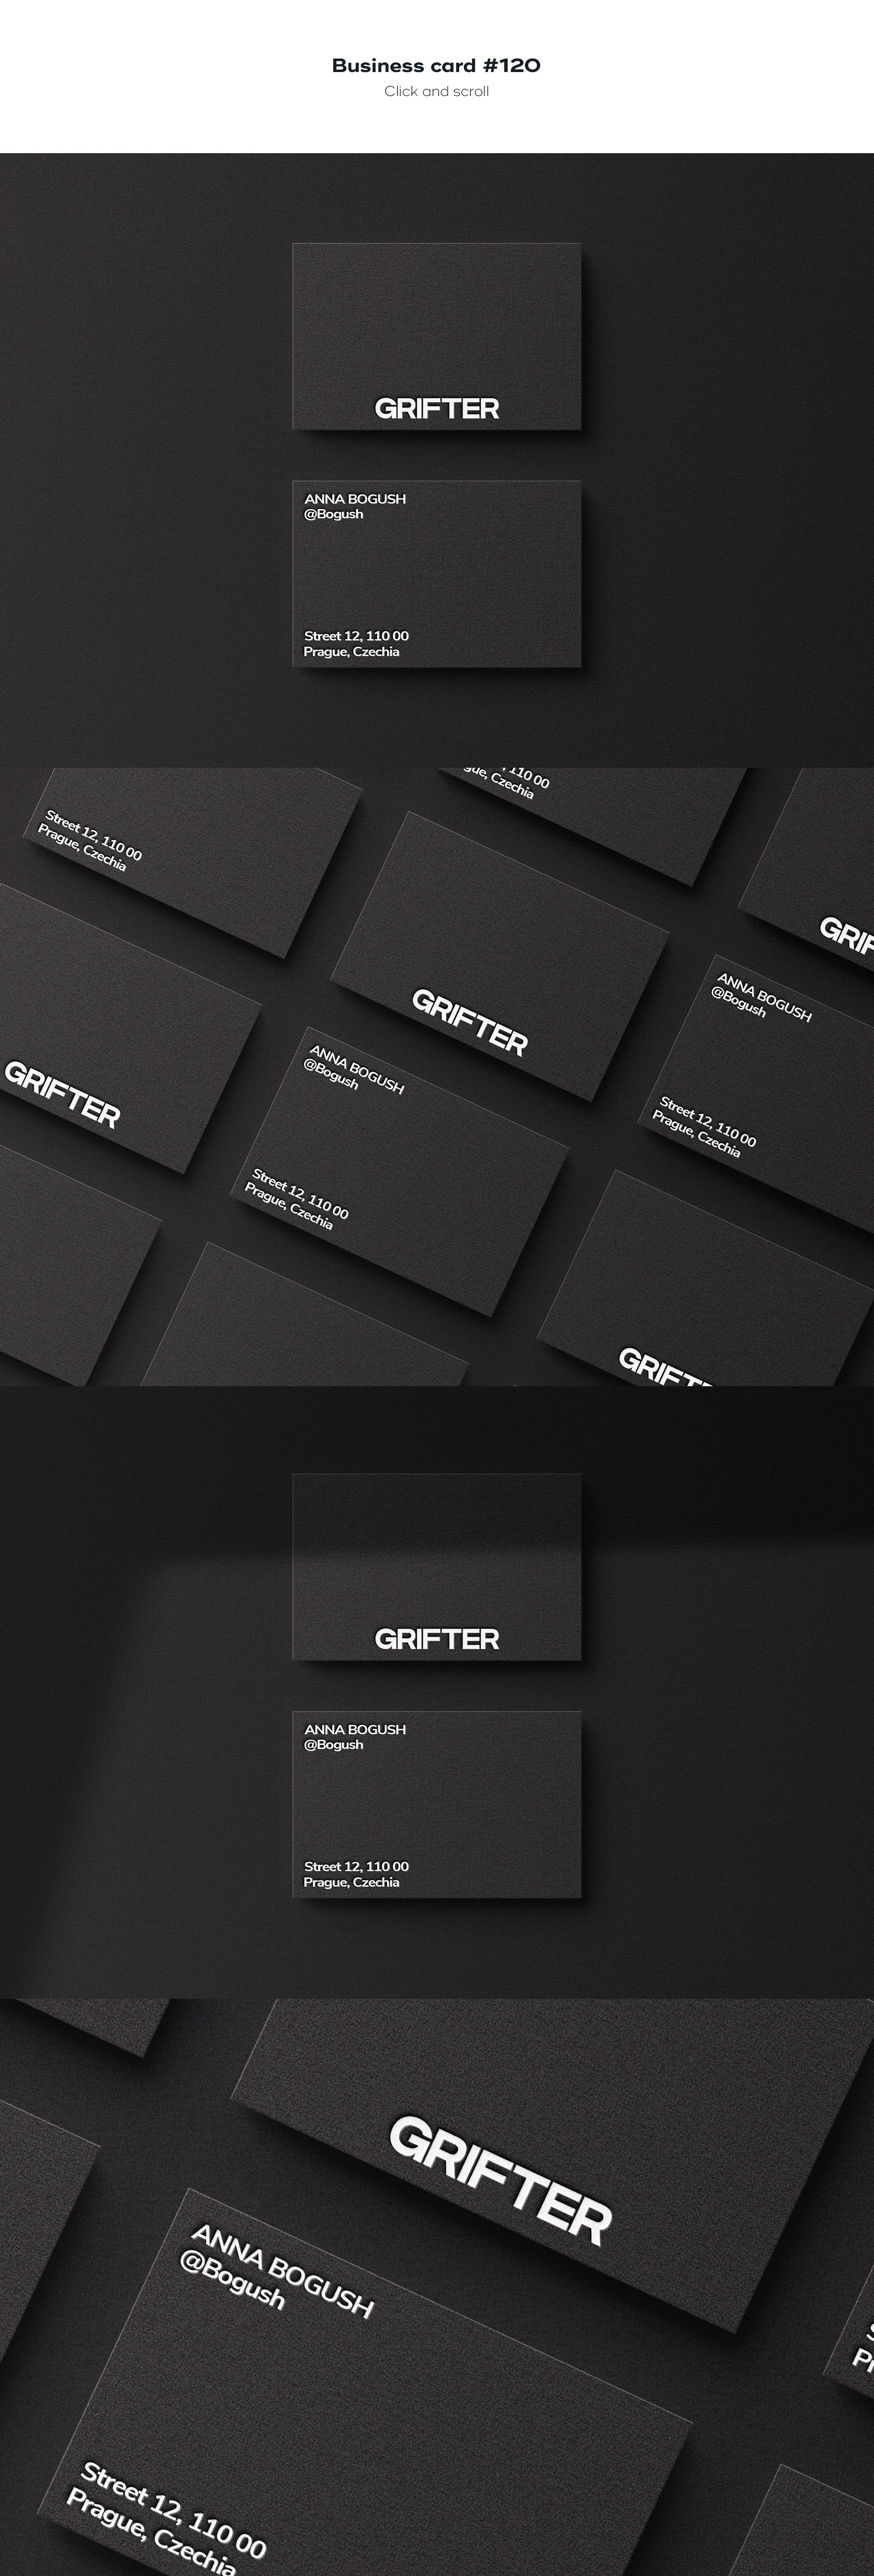 business card 120 86